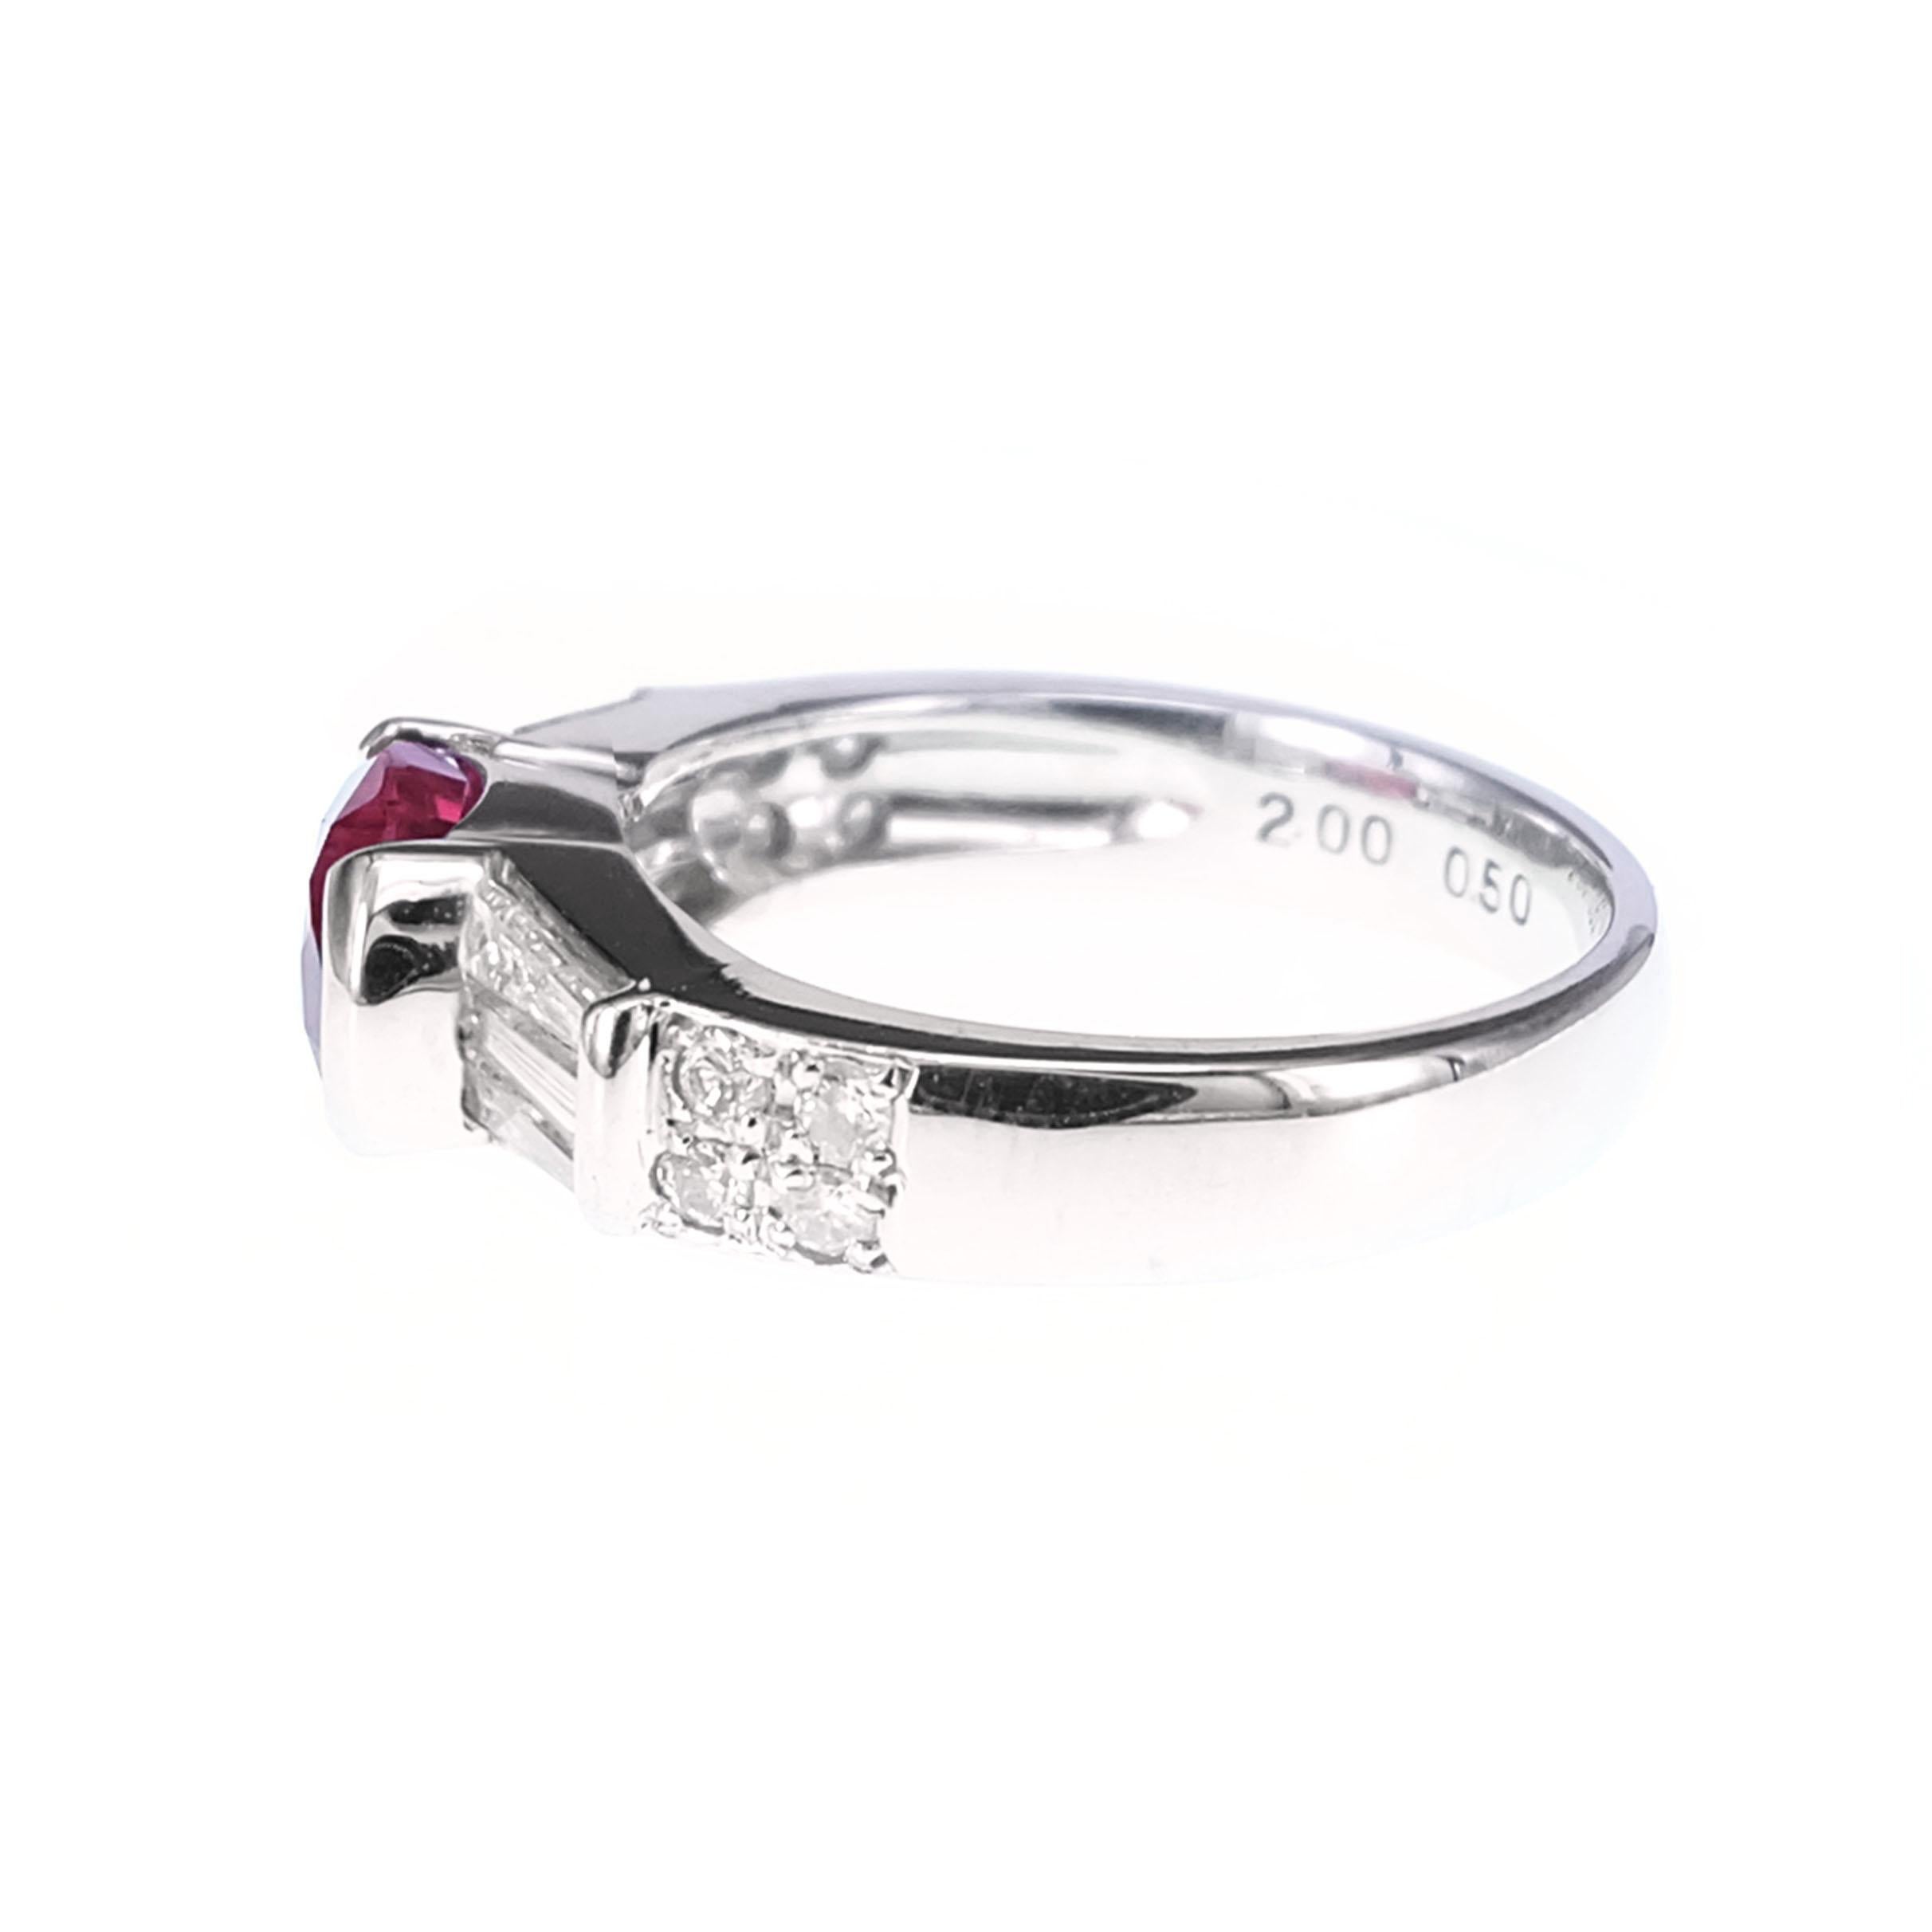 CGL Japan Lab Certified, this ring is made in Platinum 900. The ring has been set with certified two carat ruby and 0.50 carat of baguette and white round brilliant diamond. Details of the diamond are mentioned below:
Color: D
Clarity : VVS
Ring